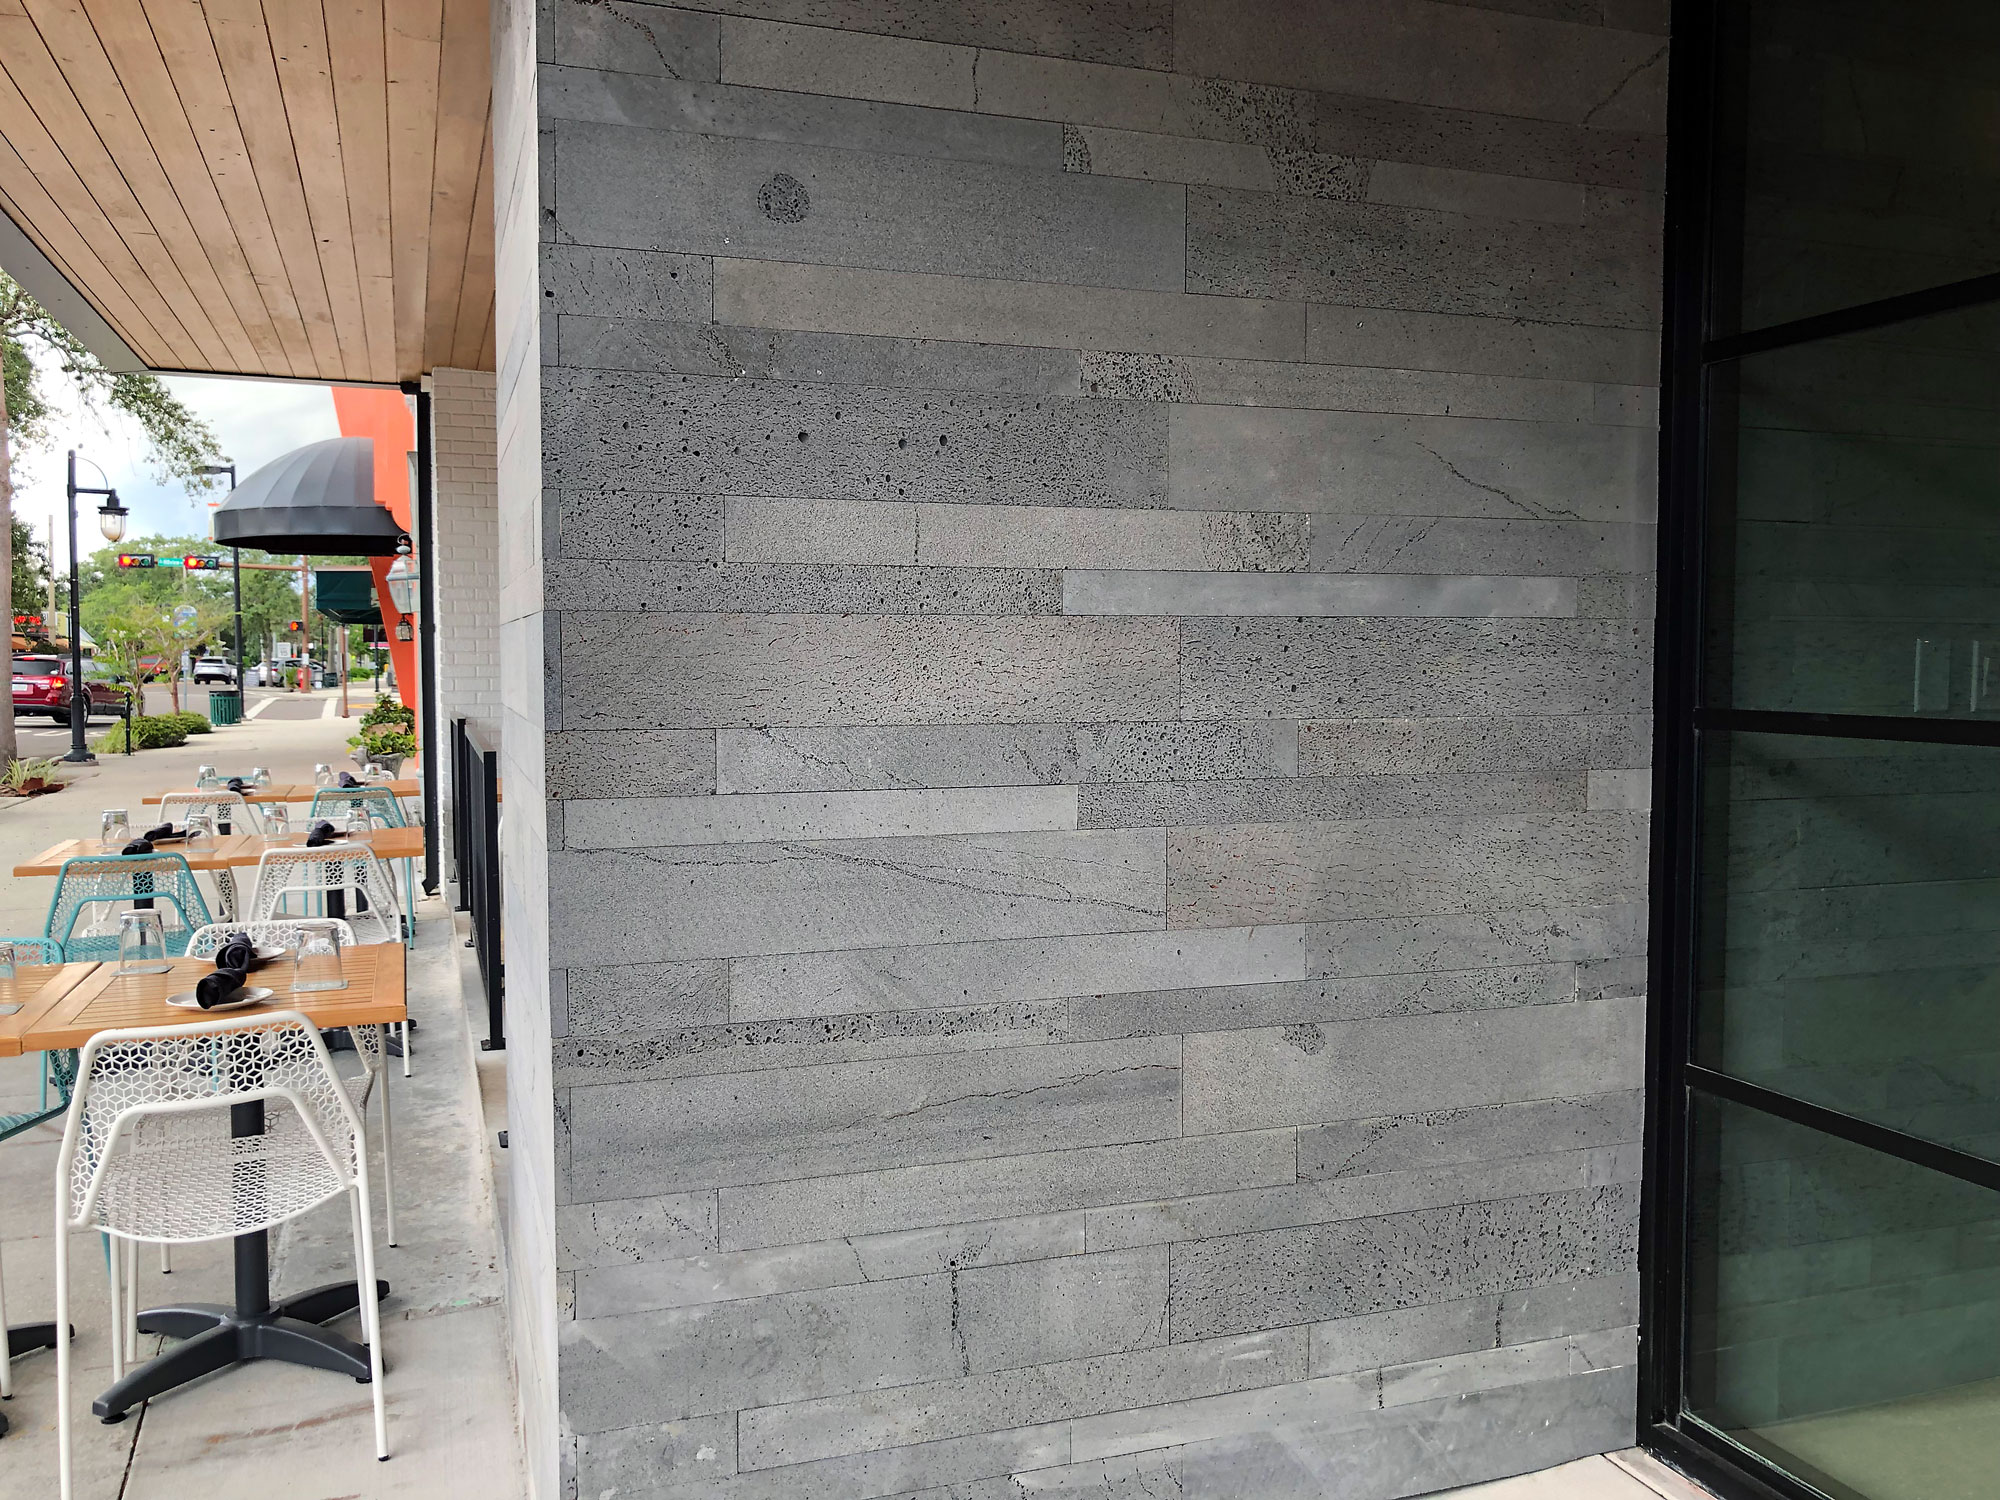 Norstone Platinum Planc Large Format Wall Tile on the exterior entry way wall of Libby's restaurant in Sarasota, FL